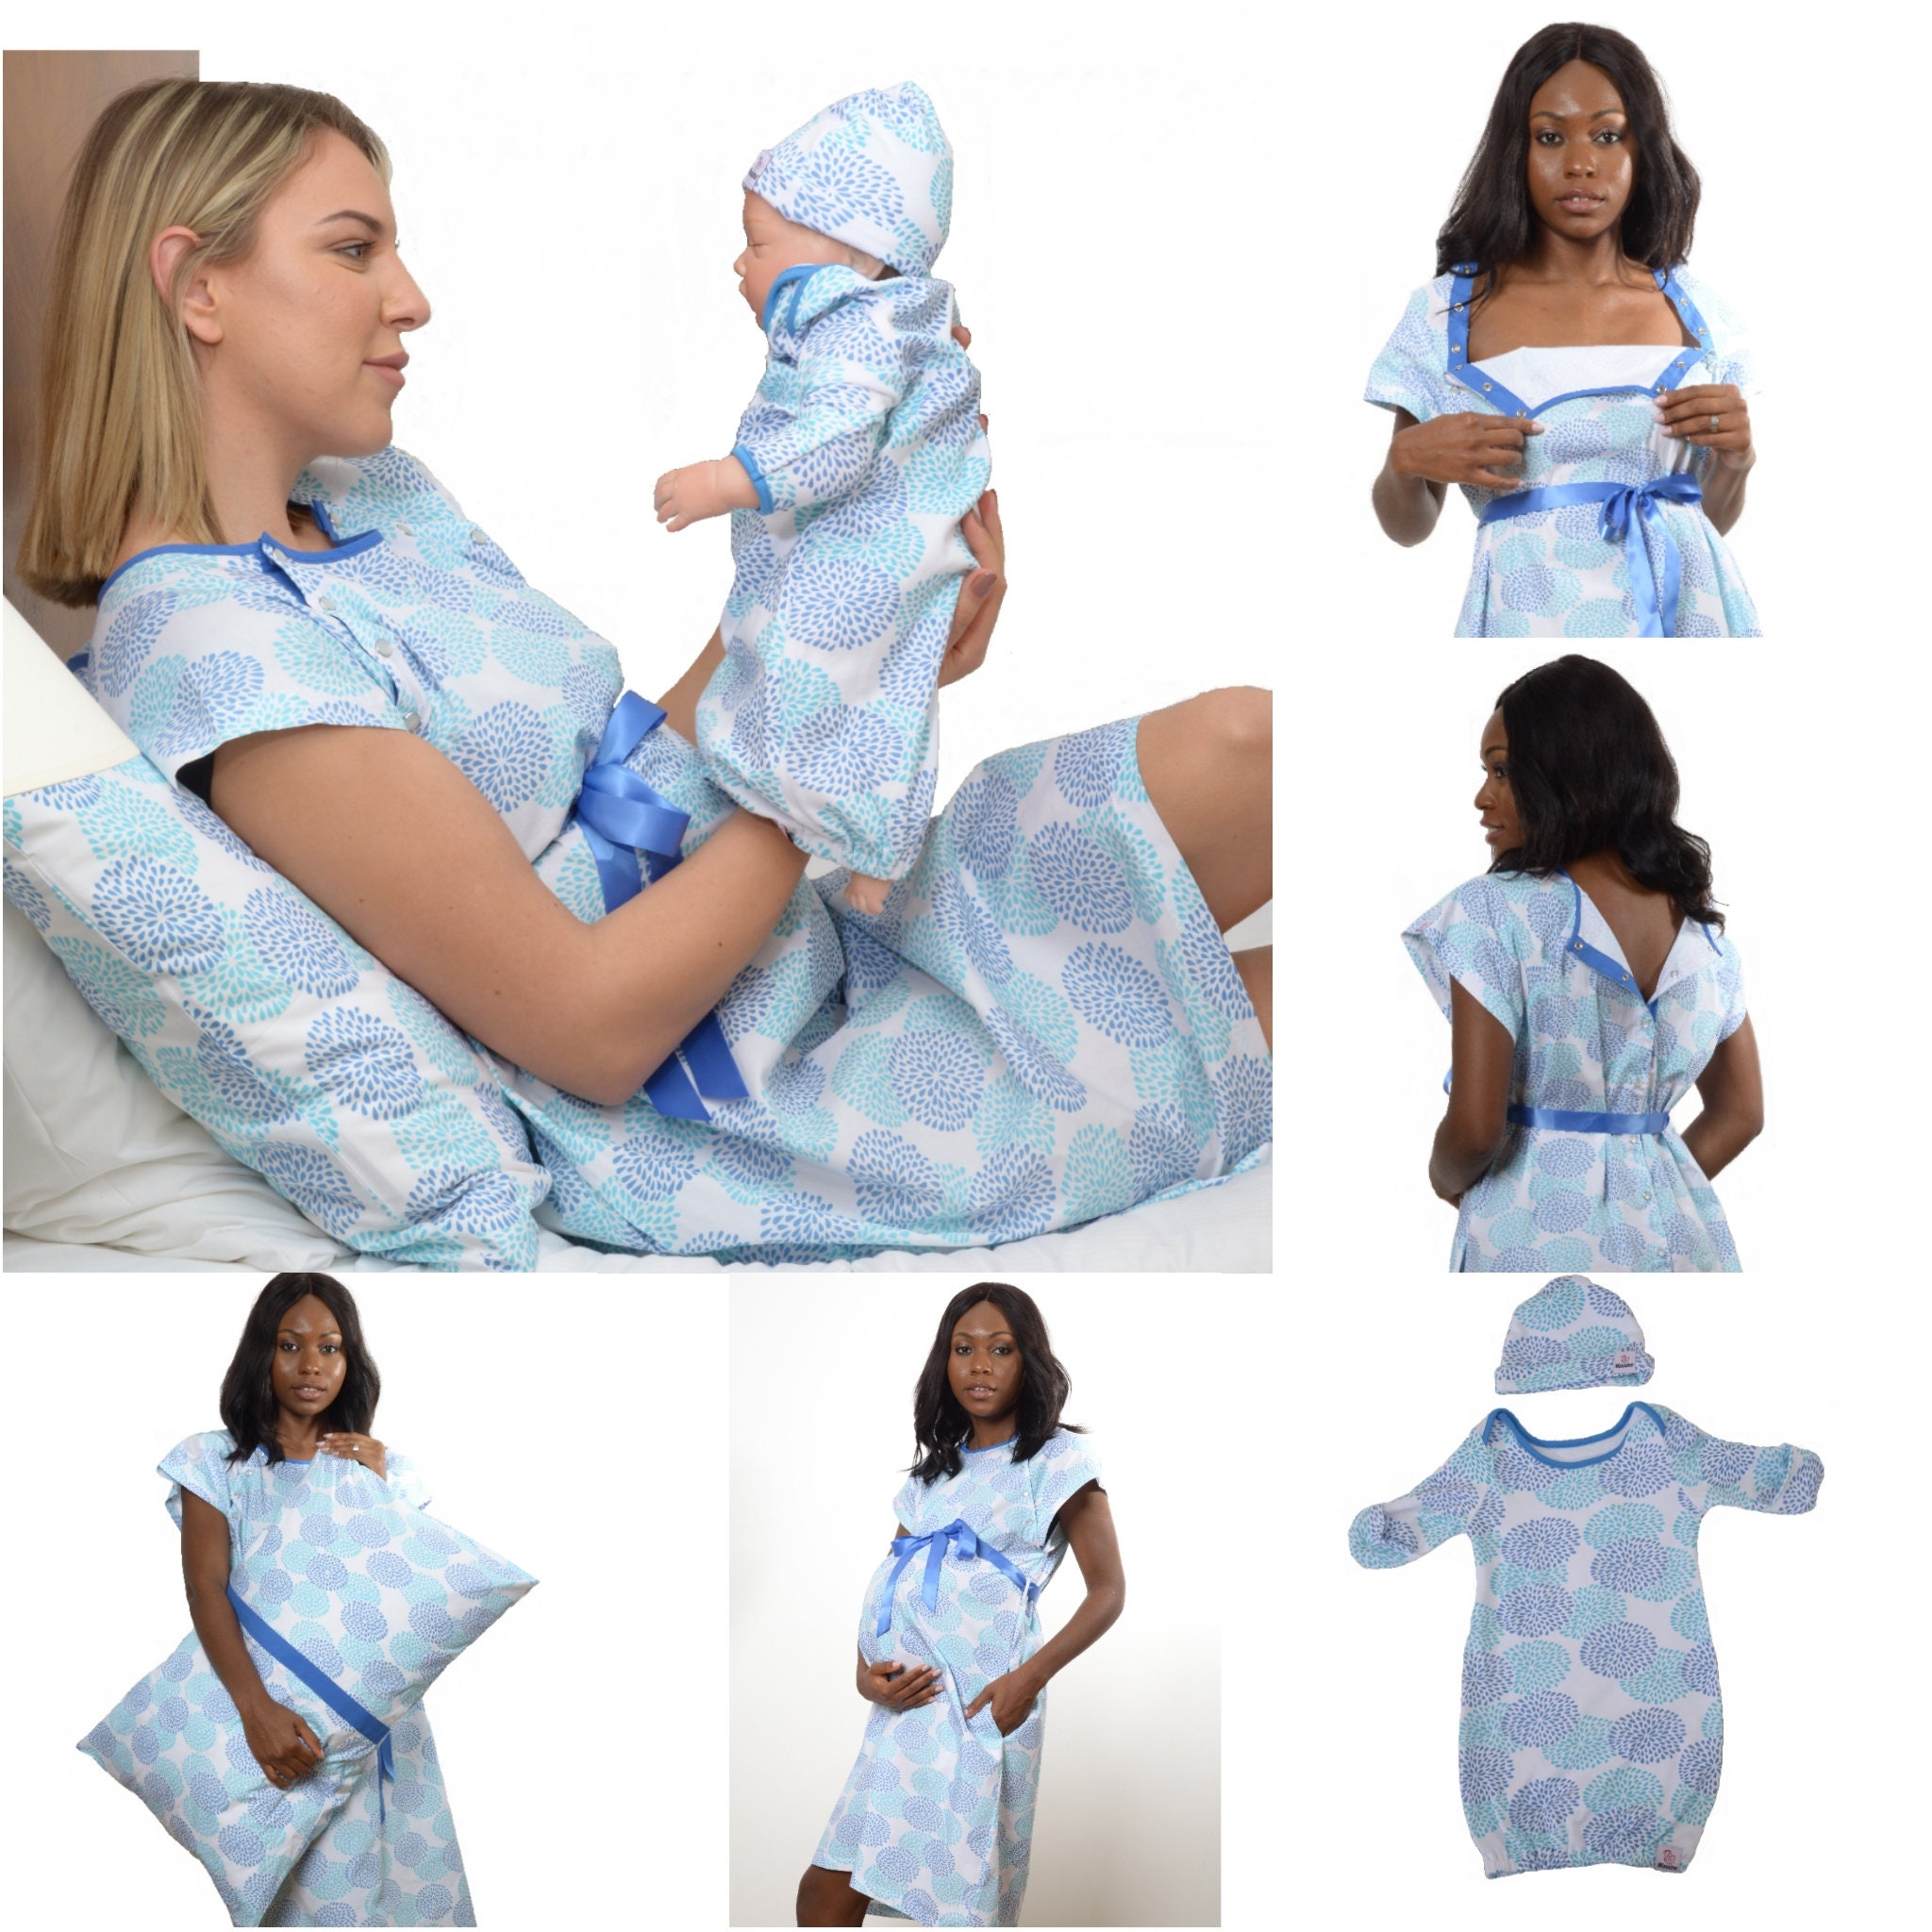 Stylish Maternity Nightgown and Matching Baby Outfit